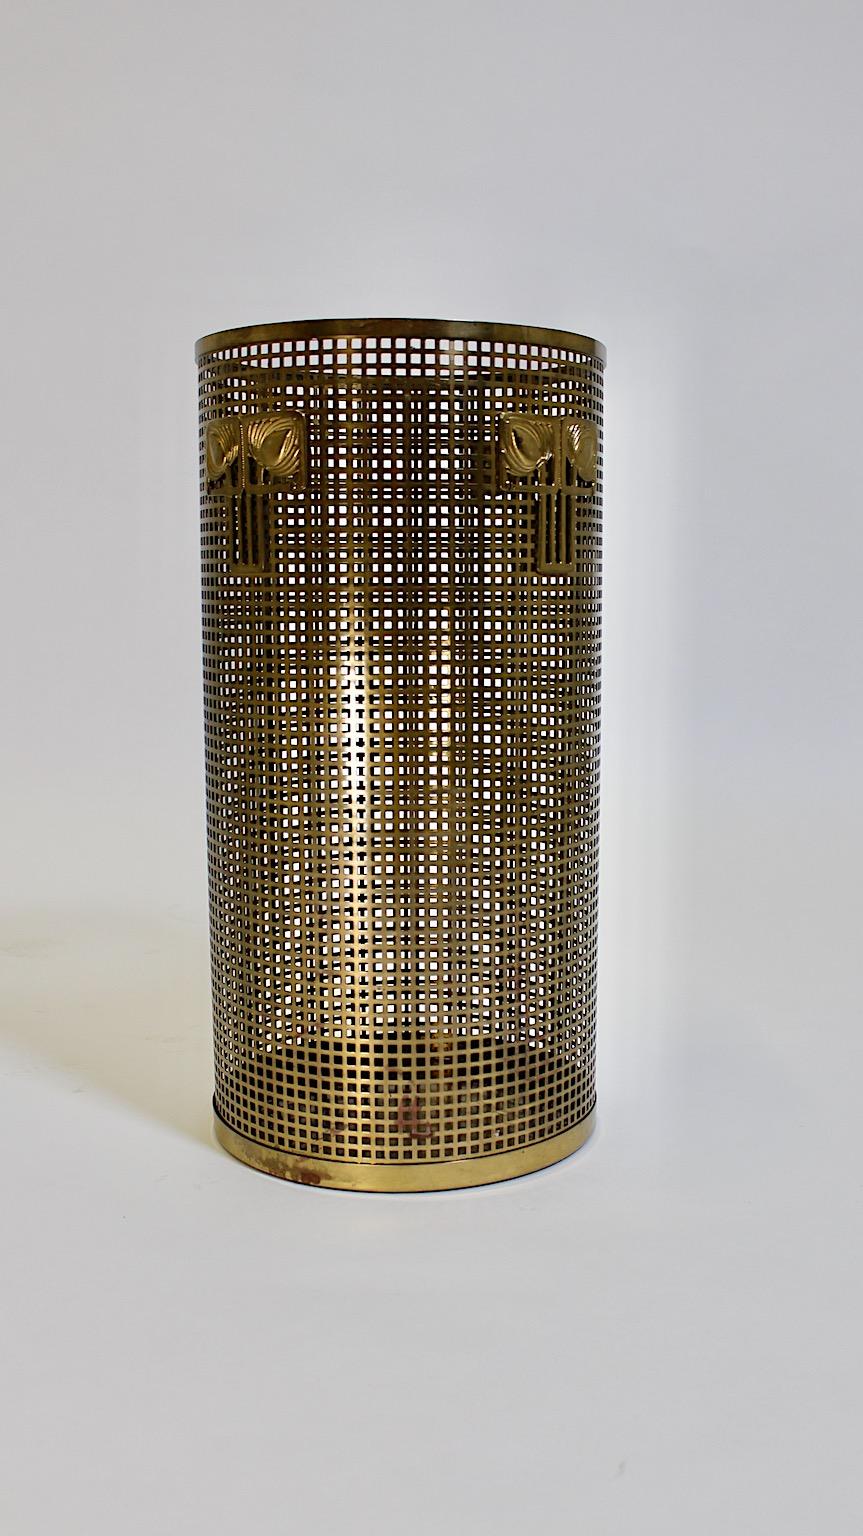 Jugendstil Style modern vintage umbrella stand or cane holder from brass 1970s Italy.
An amazing vintage umbrella stand or cane holder for your entryway or entrance made from brass in wonderful grid pattern with floral motifs 1970s Italy.
We love